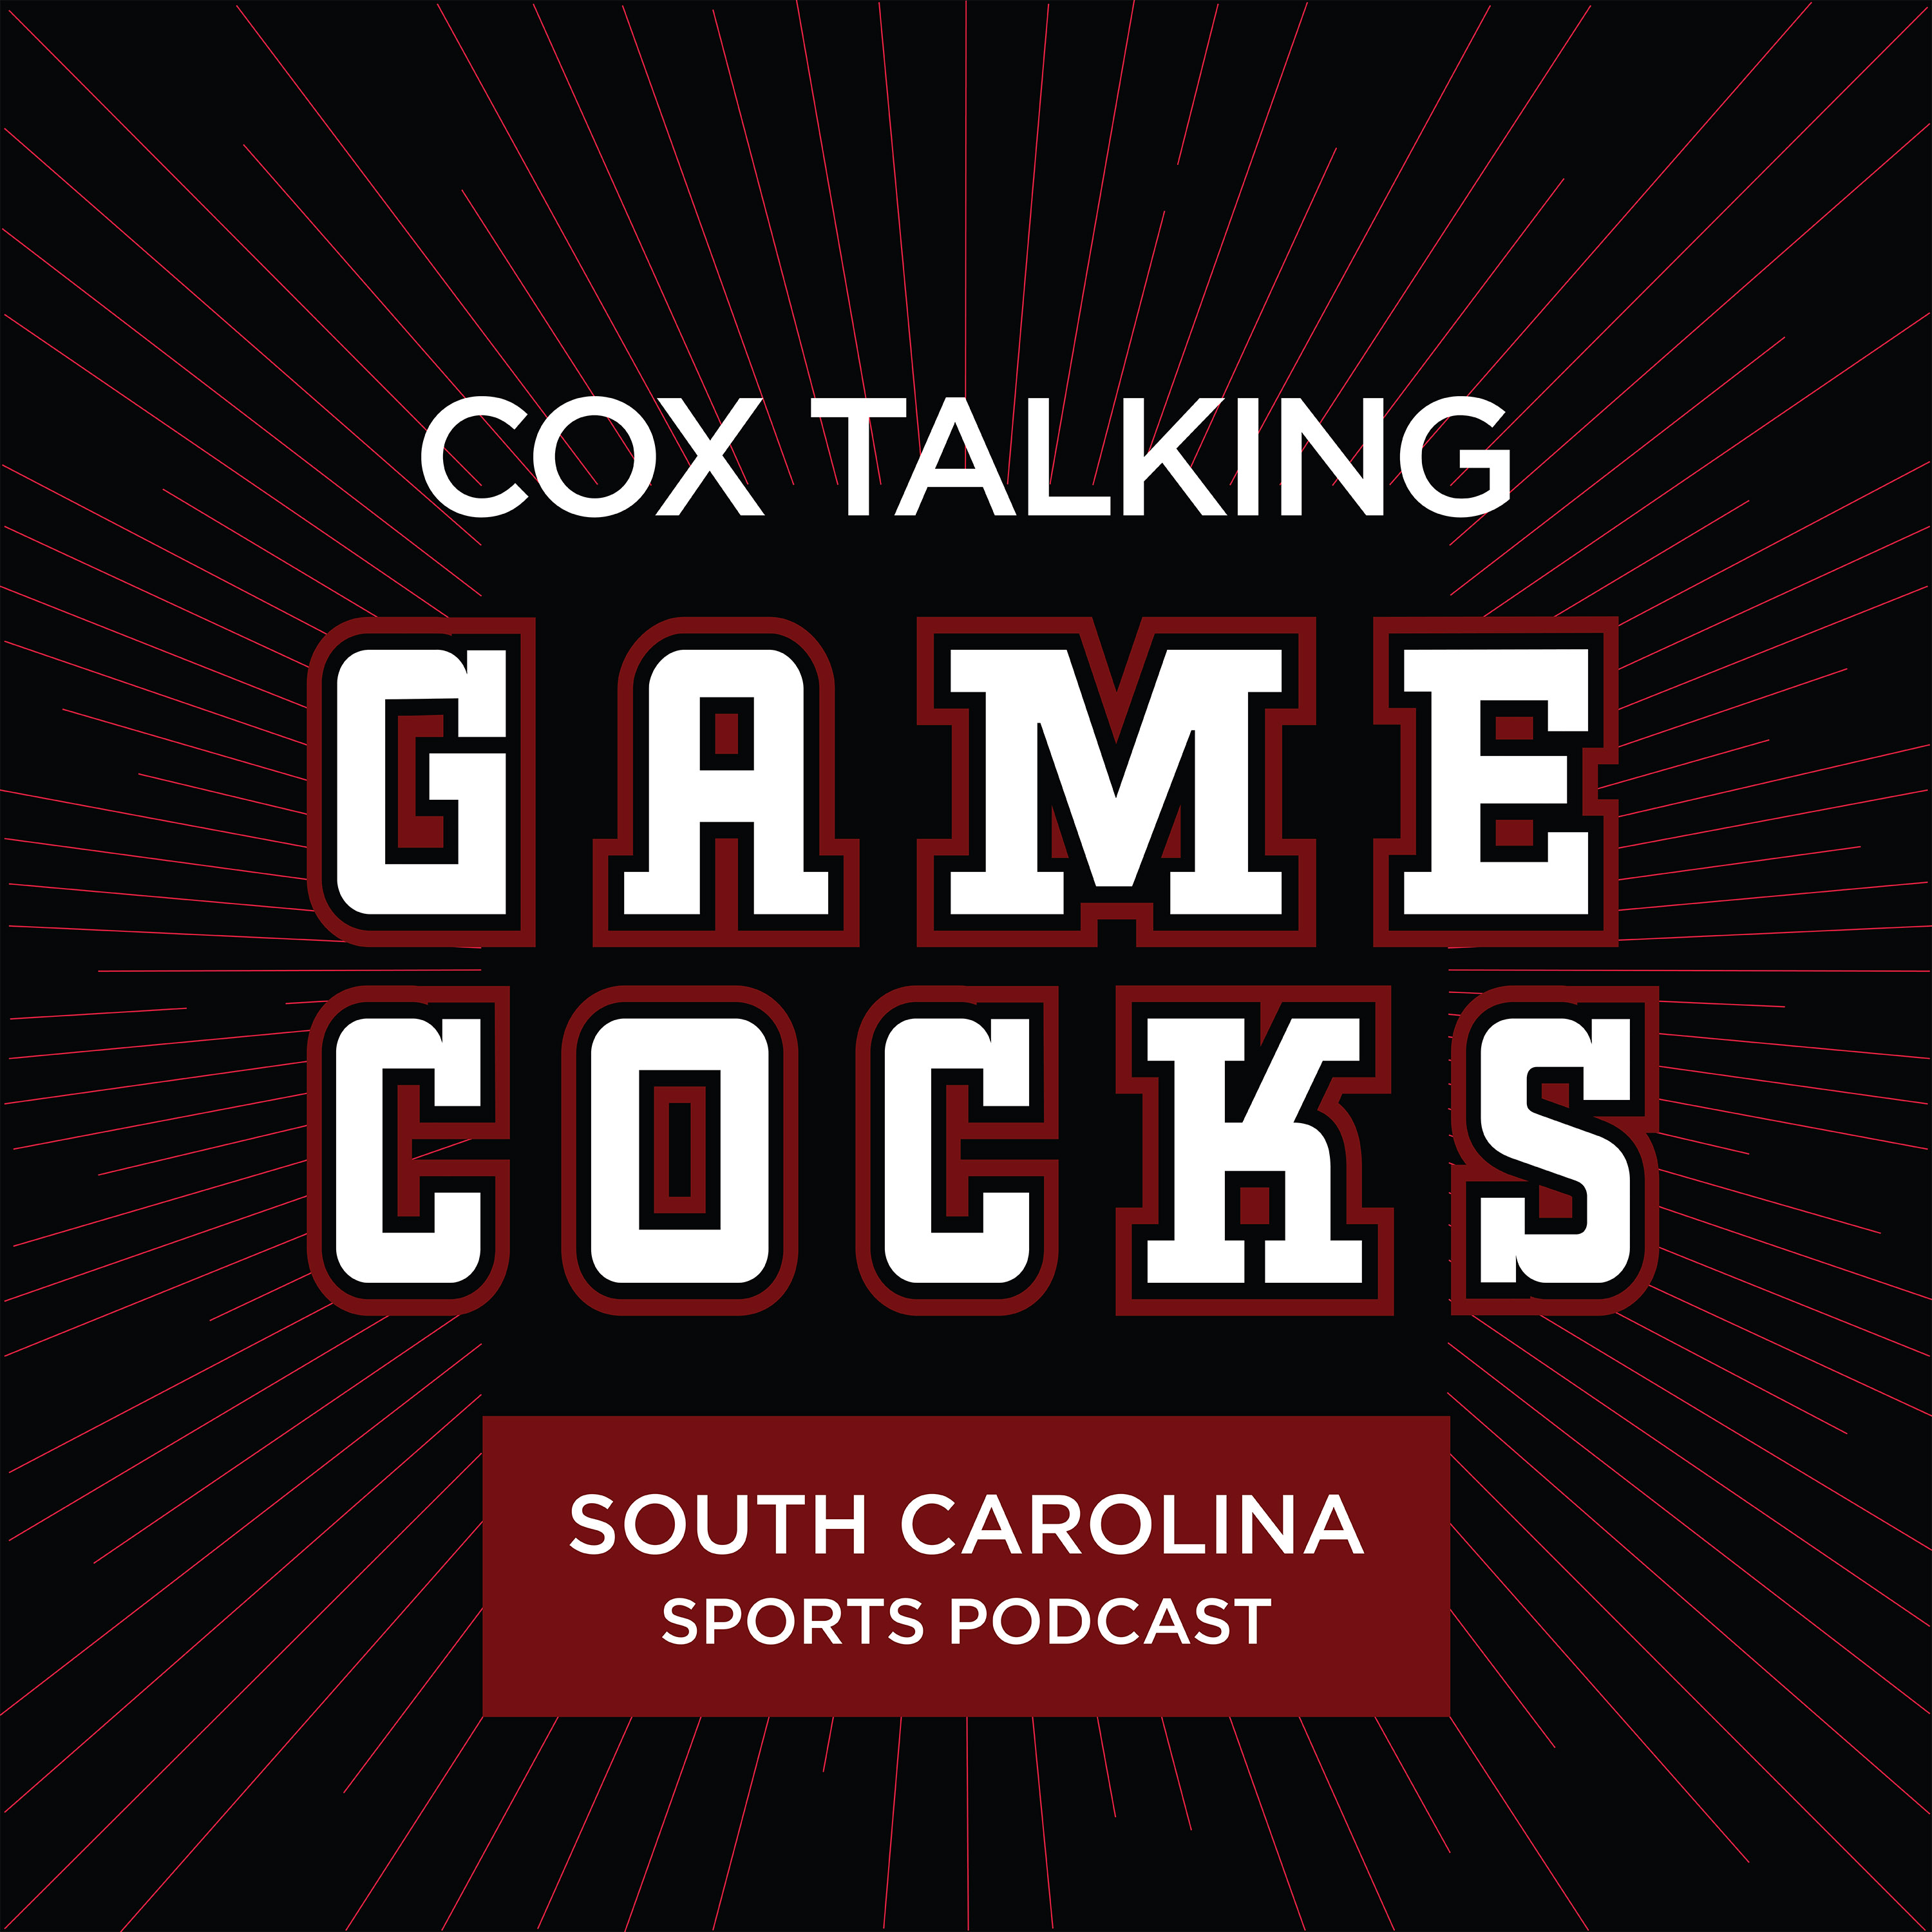 Gamecock Football Treks to The Swamp: Pregame Analysis and Storylines + USC Athletics Weekly Review